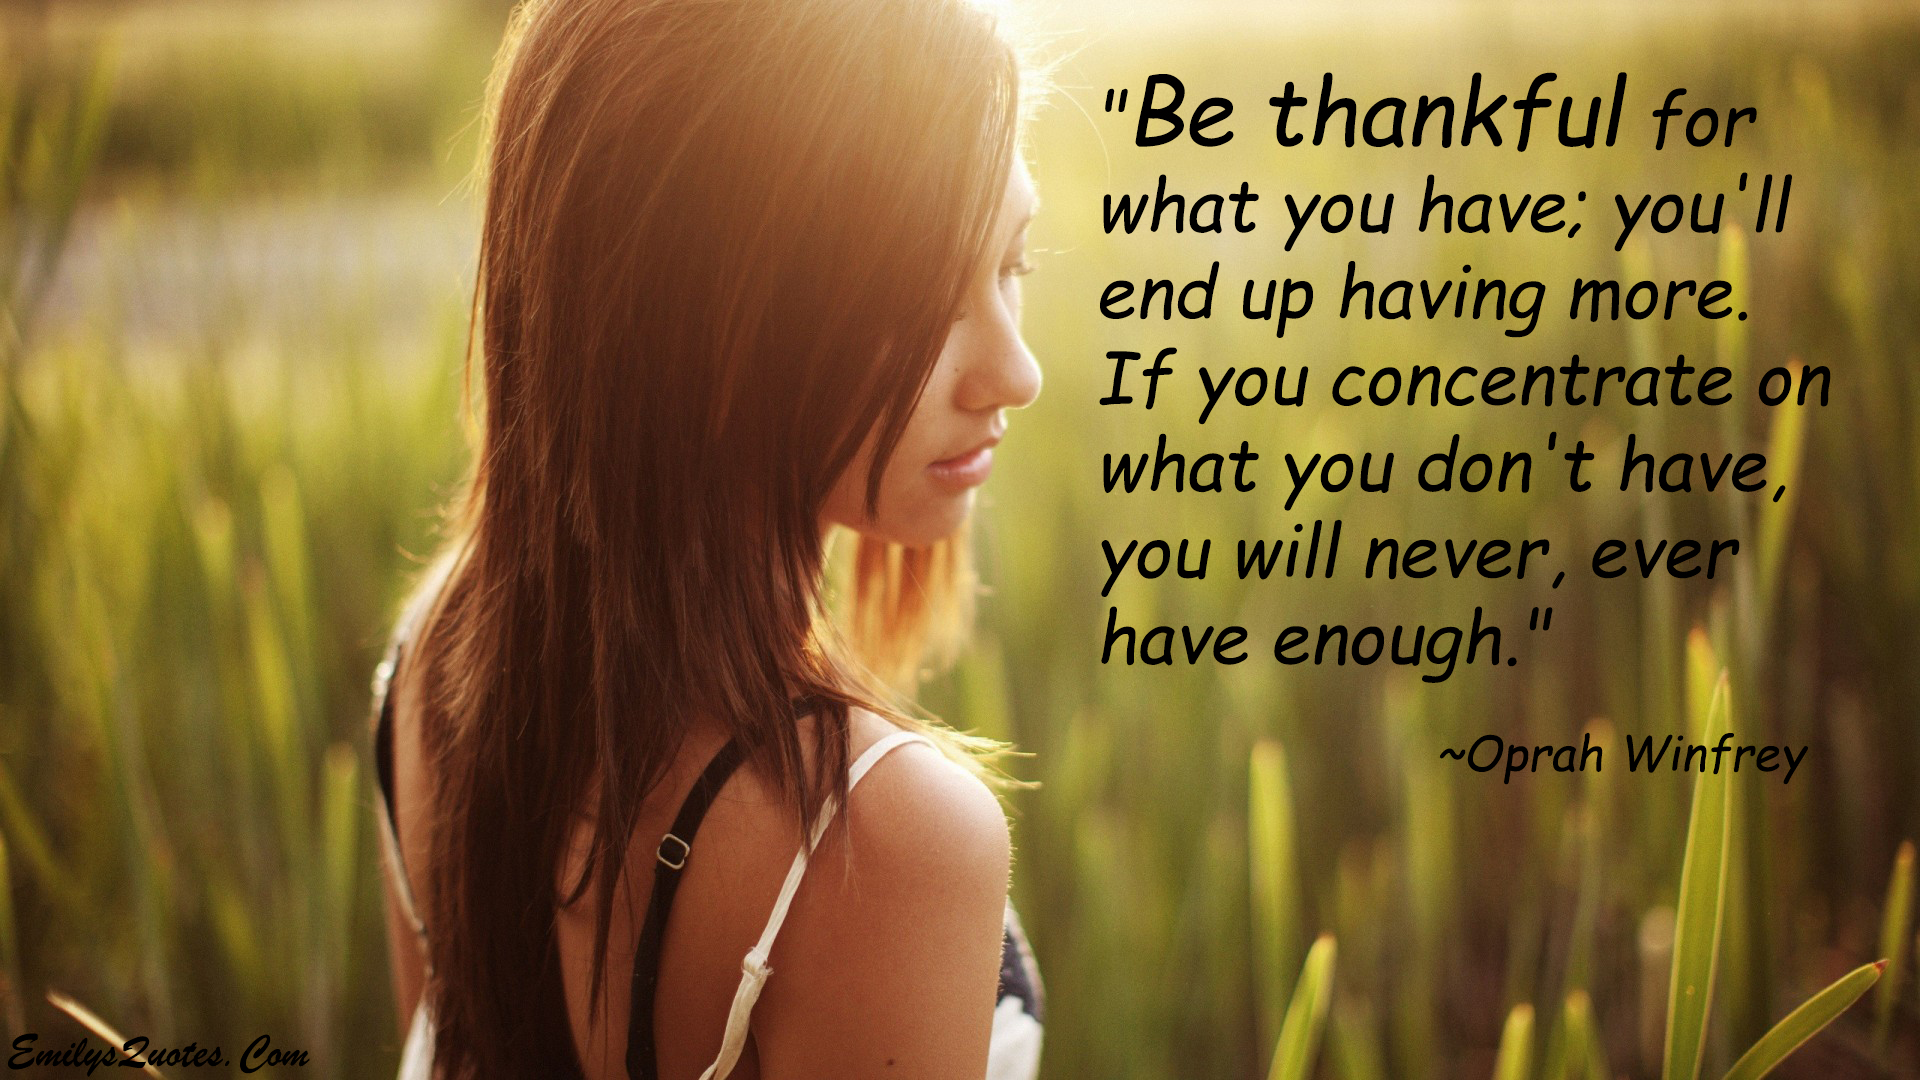 Be thankful for what you have; you’ll end up having more. If you concentrate on what you don’t have, you will never, ever have enough